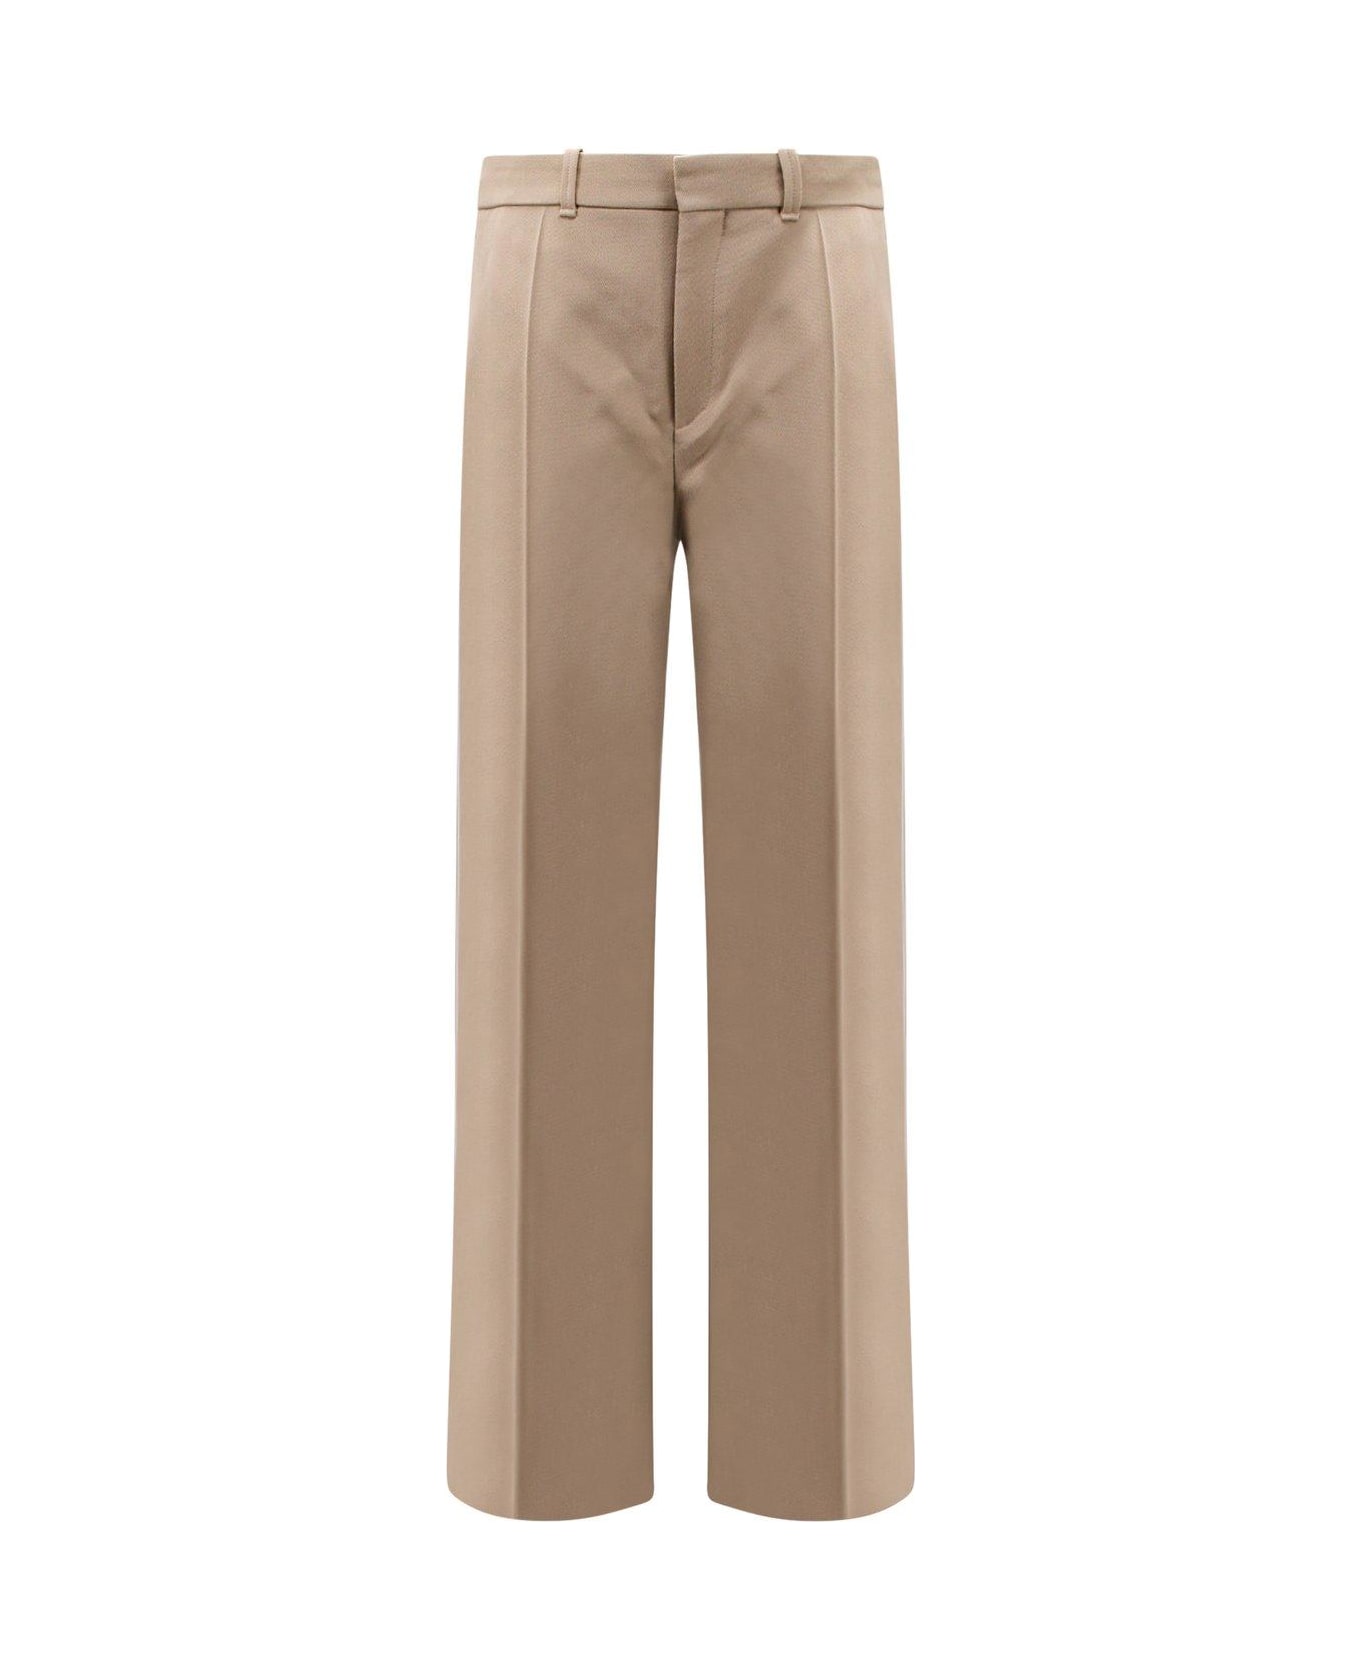 Chloé Flared Tailored Trousers - Beige